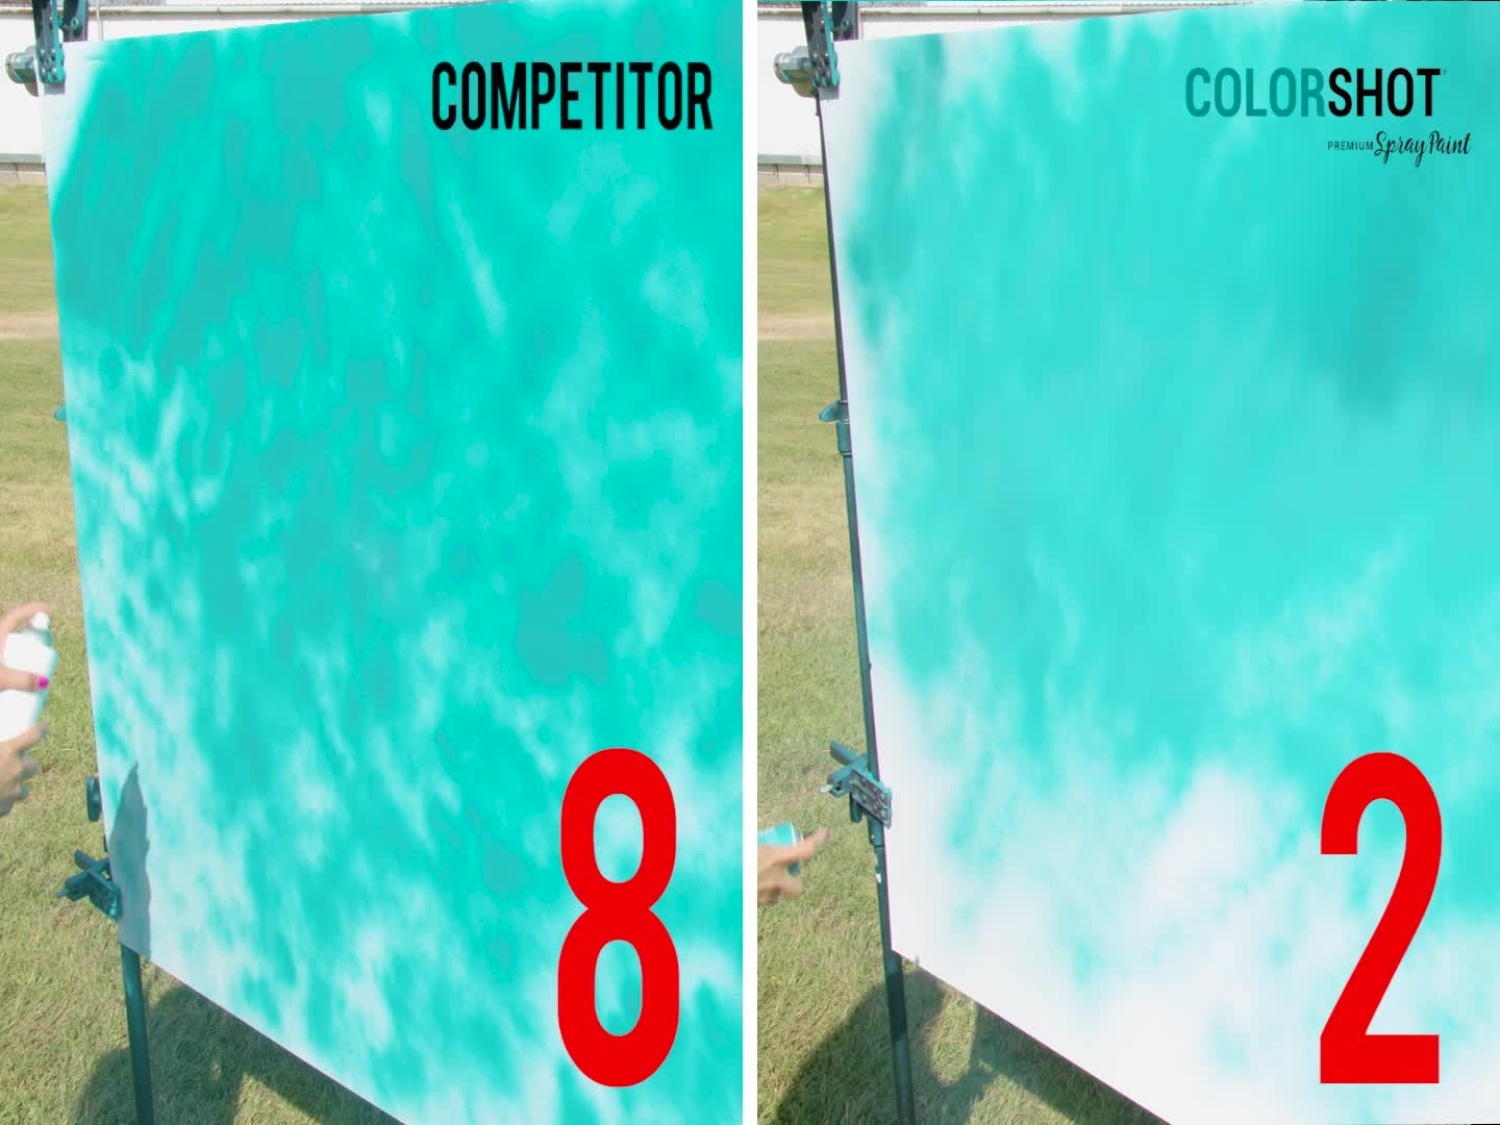 Comparing COLORSHOT with Competitors